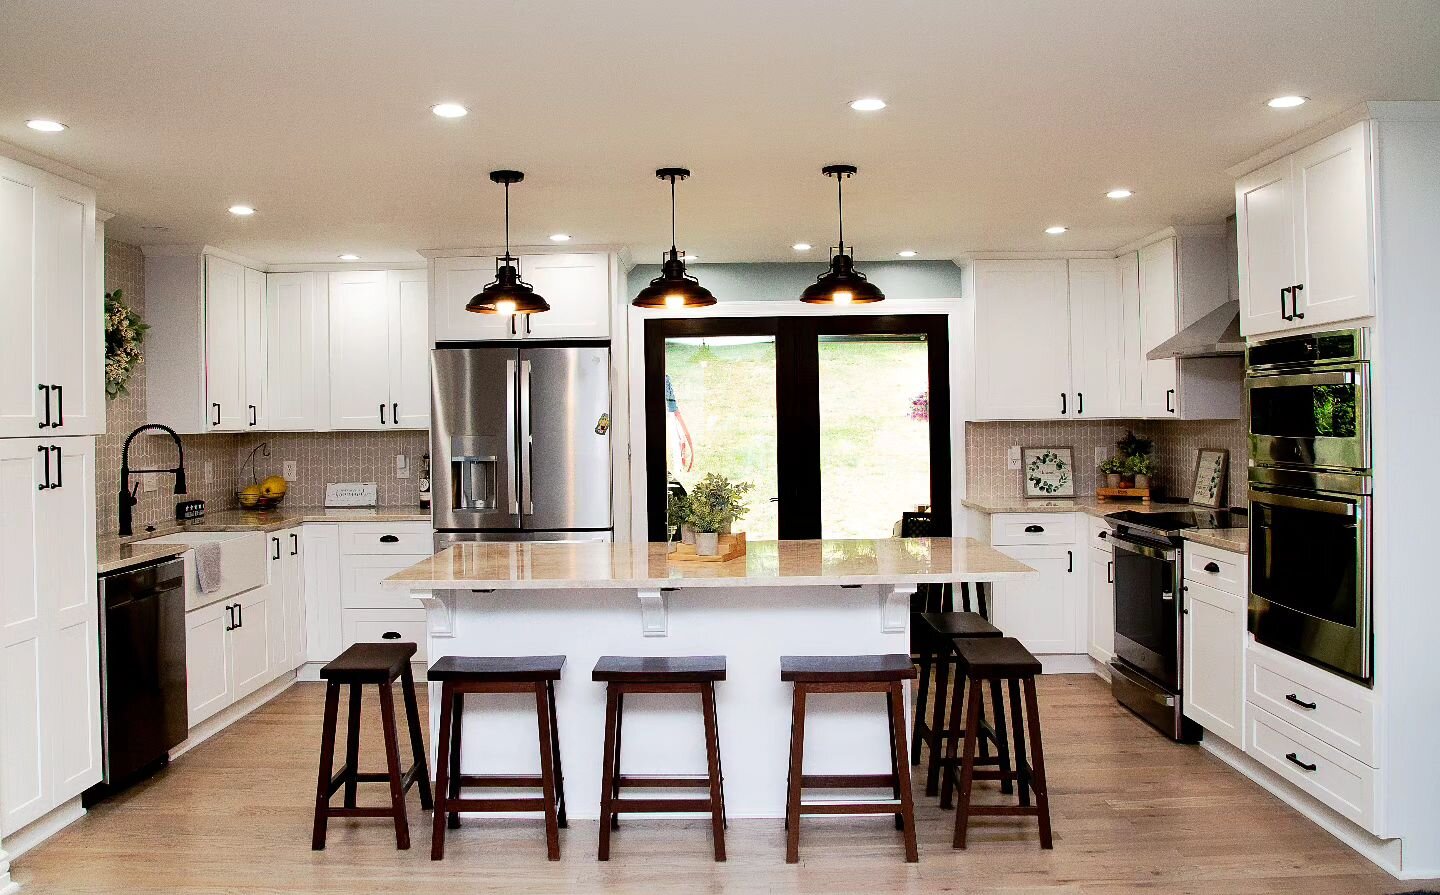 4! Can't believe it's almost the New Year! Remember how we renovated the farmhouse kitchen last spring?

We still love this transformation from a dark and small galley kitchen and dining room to one giant, cook's dream kitchen with ample space for st